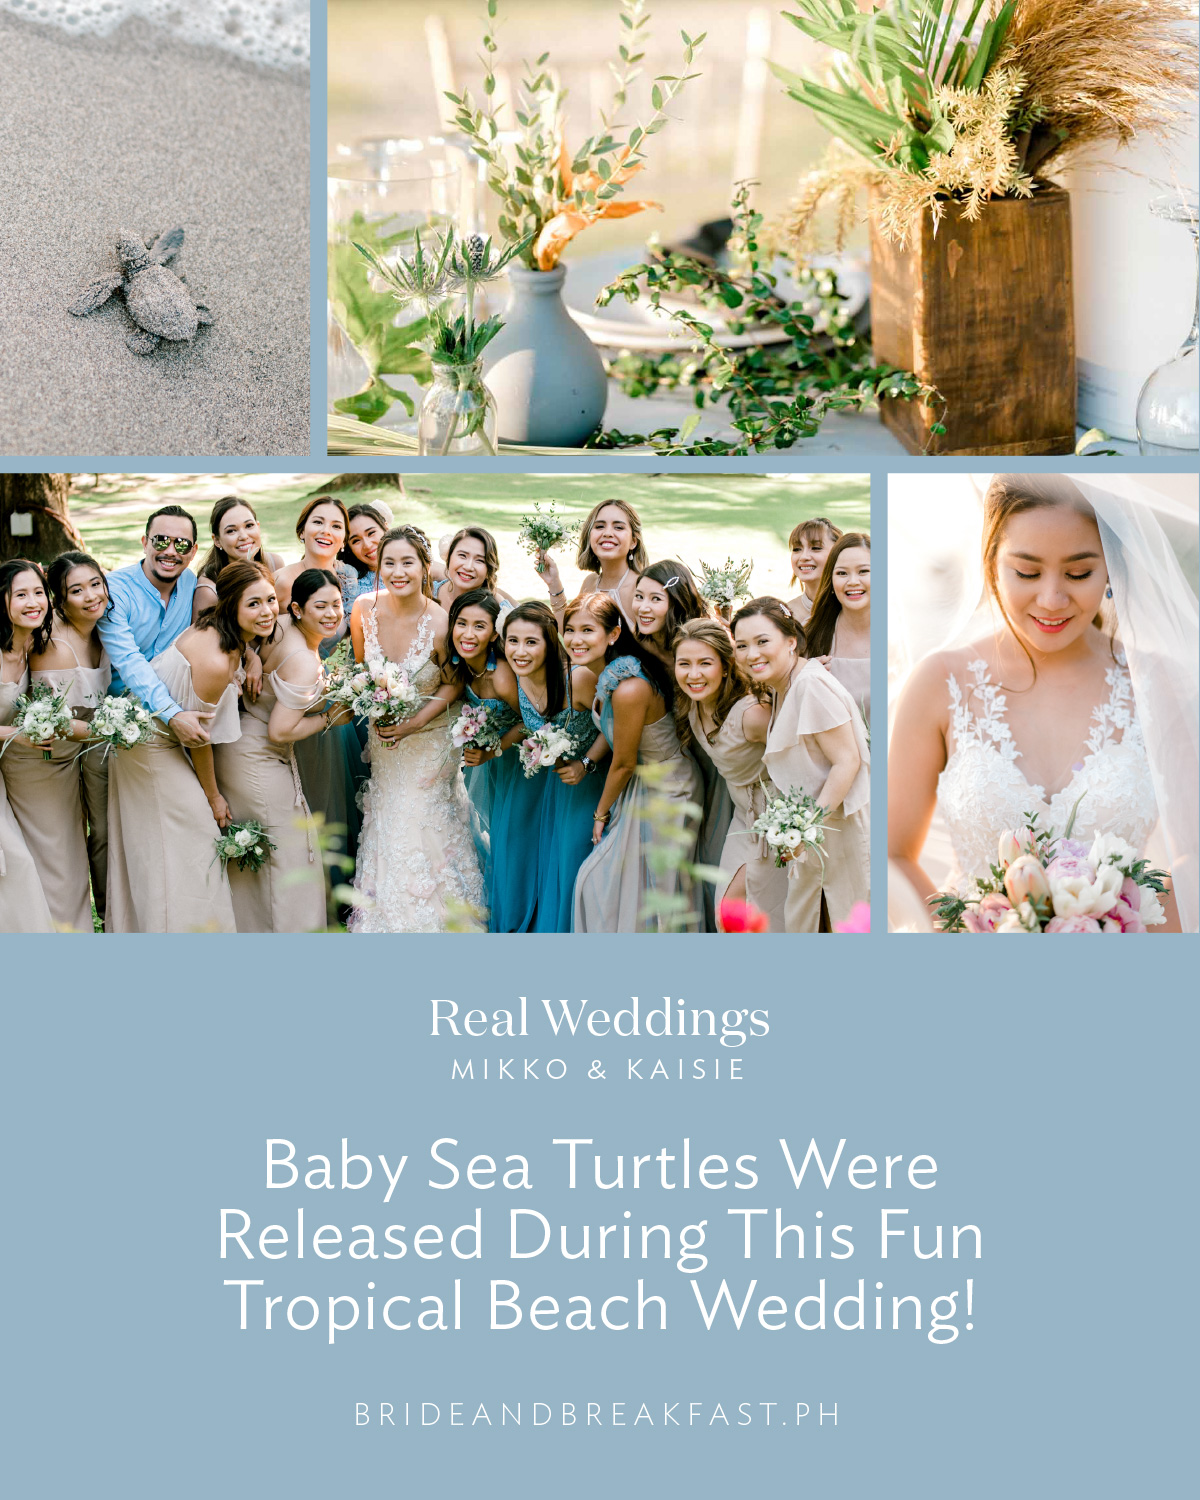 Baby Sea Turtles Were Released During This Fun Tropical Beach Wedding!